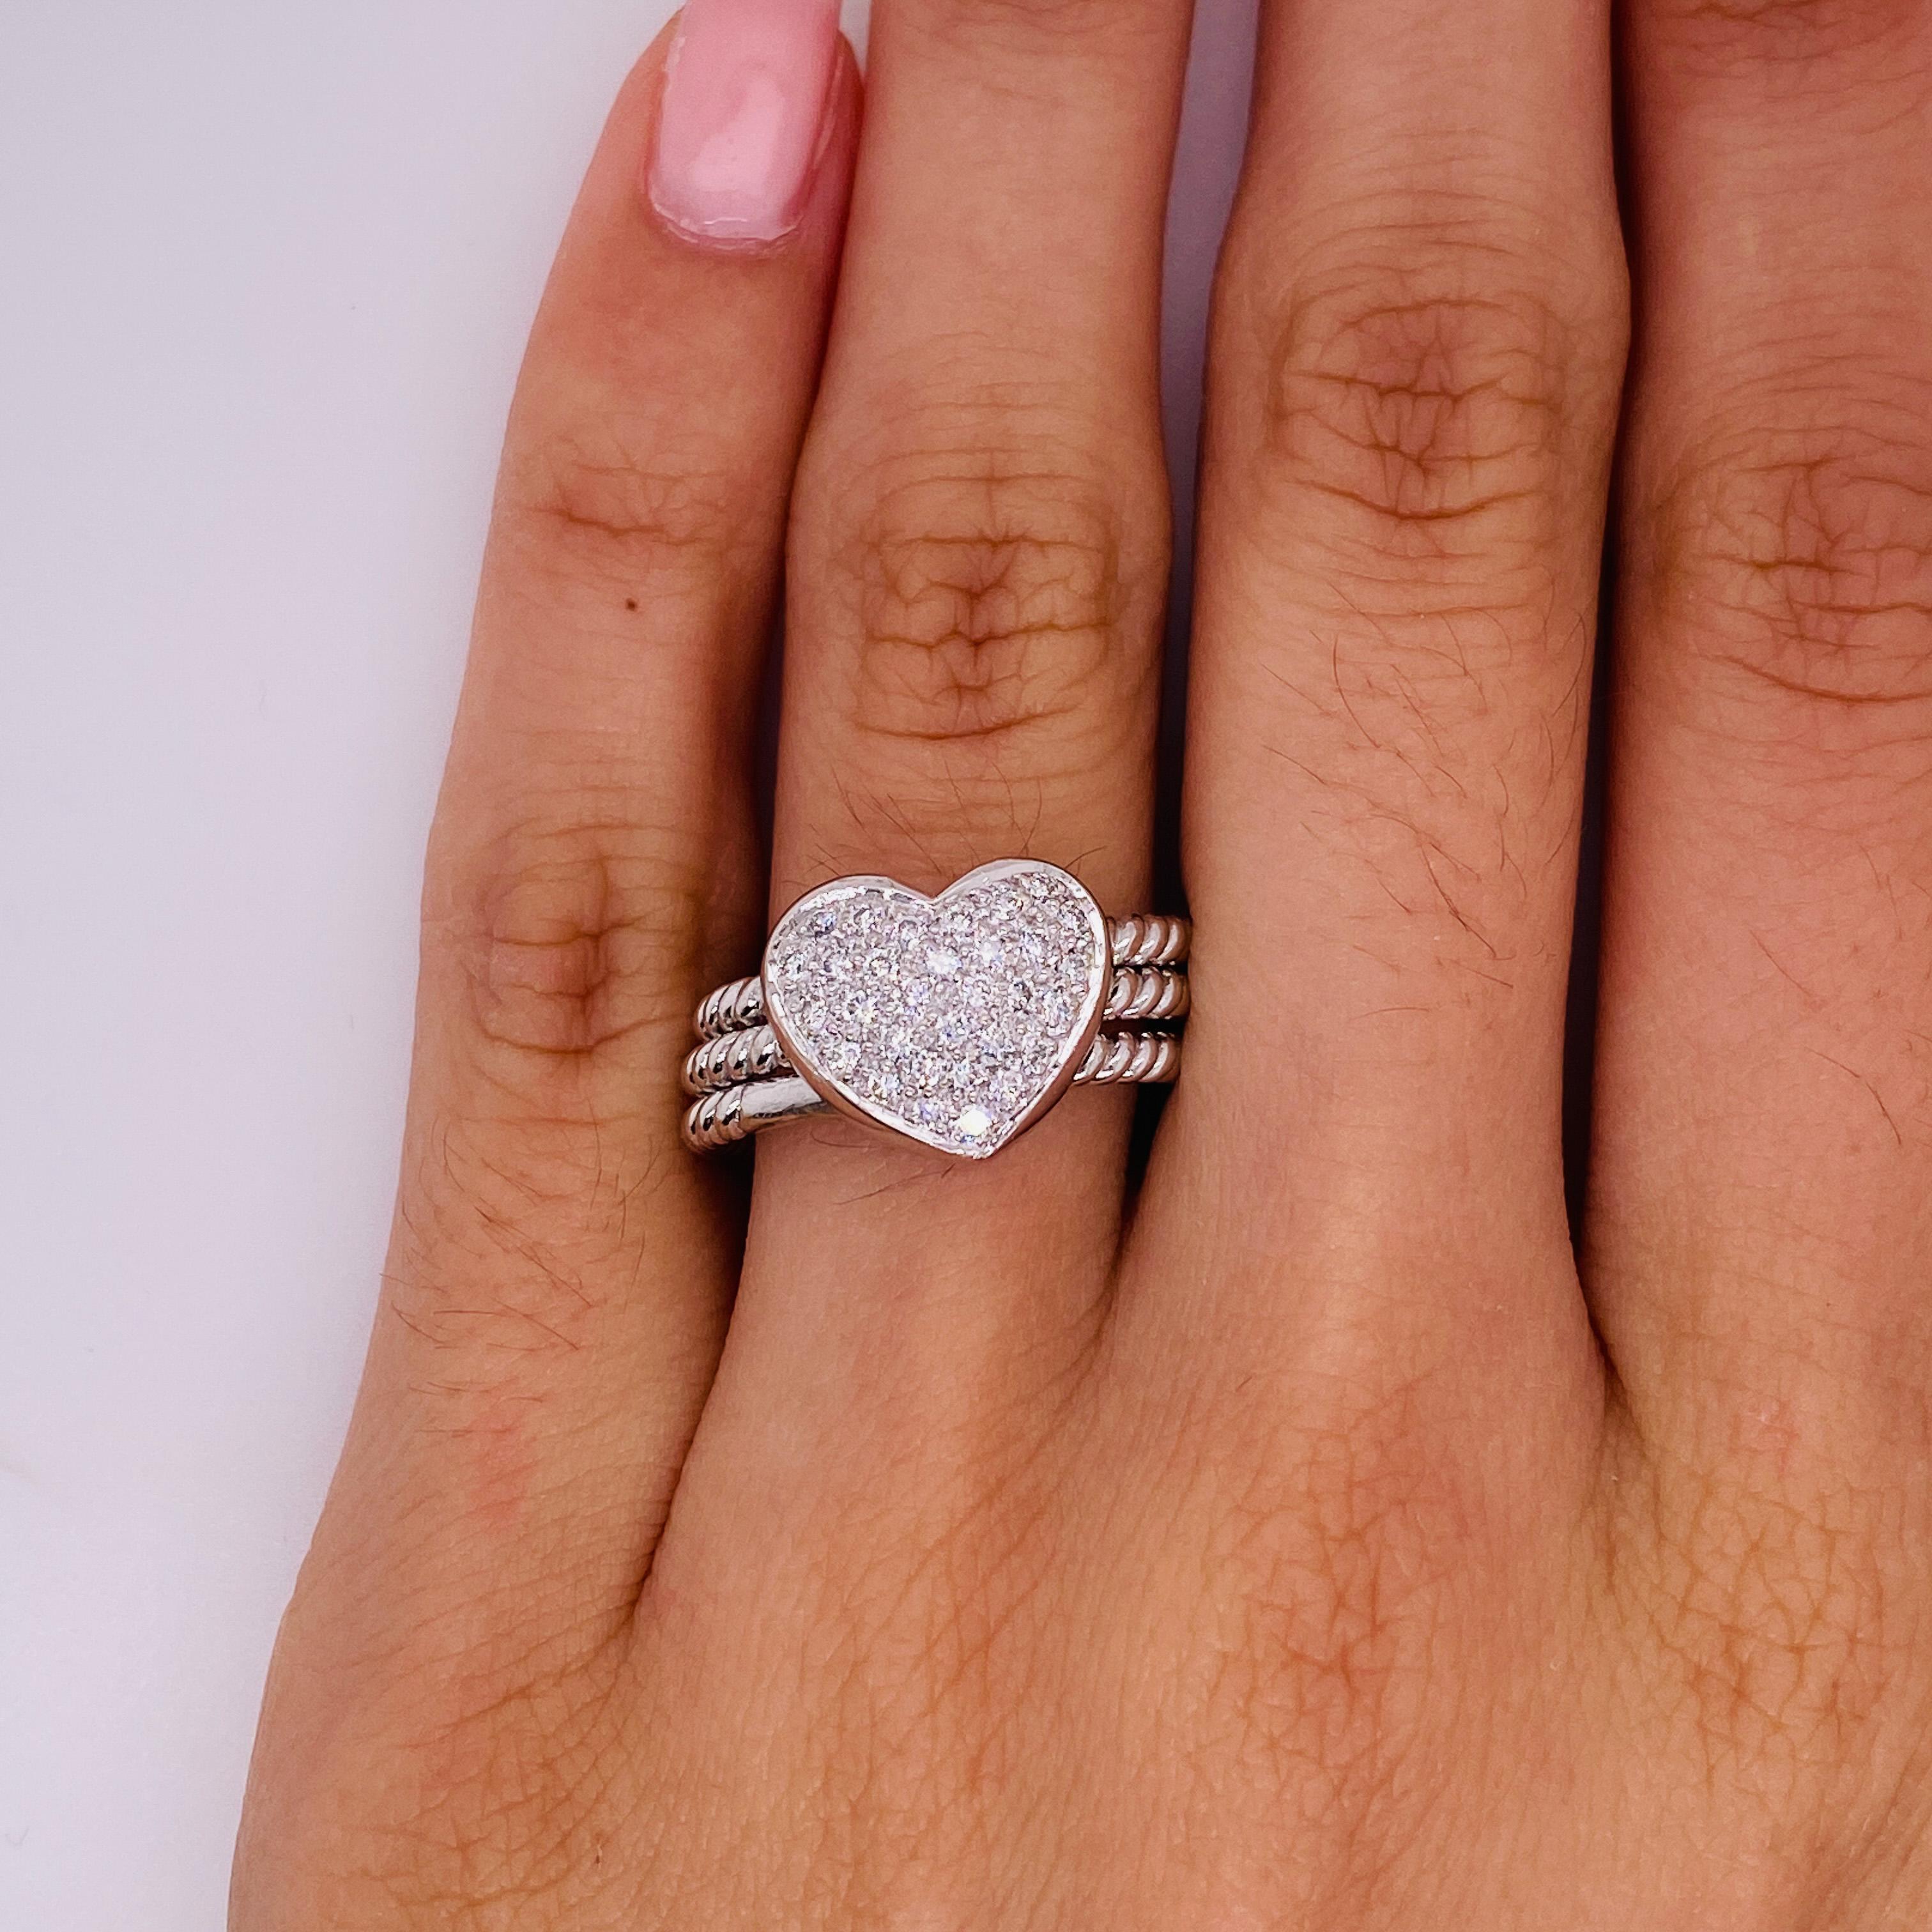 Round Cut Pave Diamond Heart Ring in 18k White Gold 0.50 Carat Twisted Band Spinner Ring